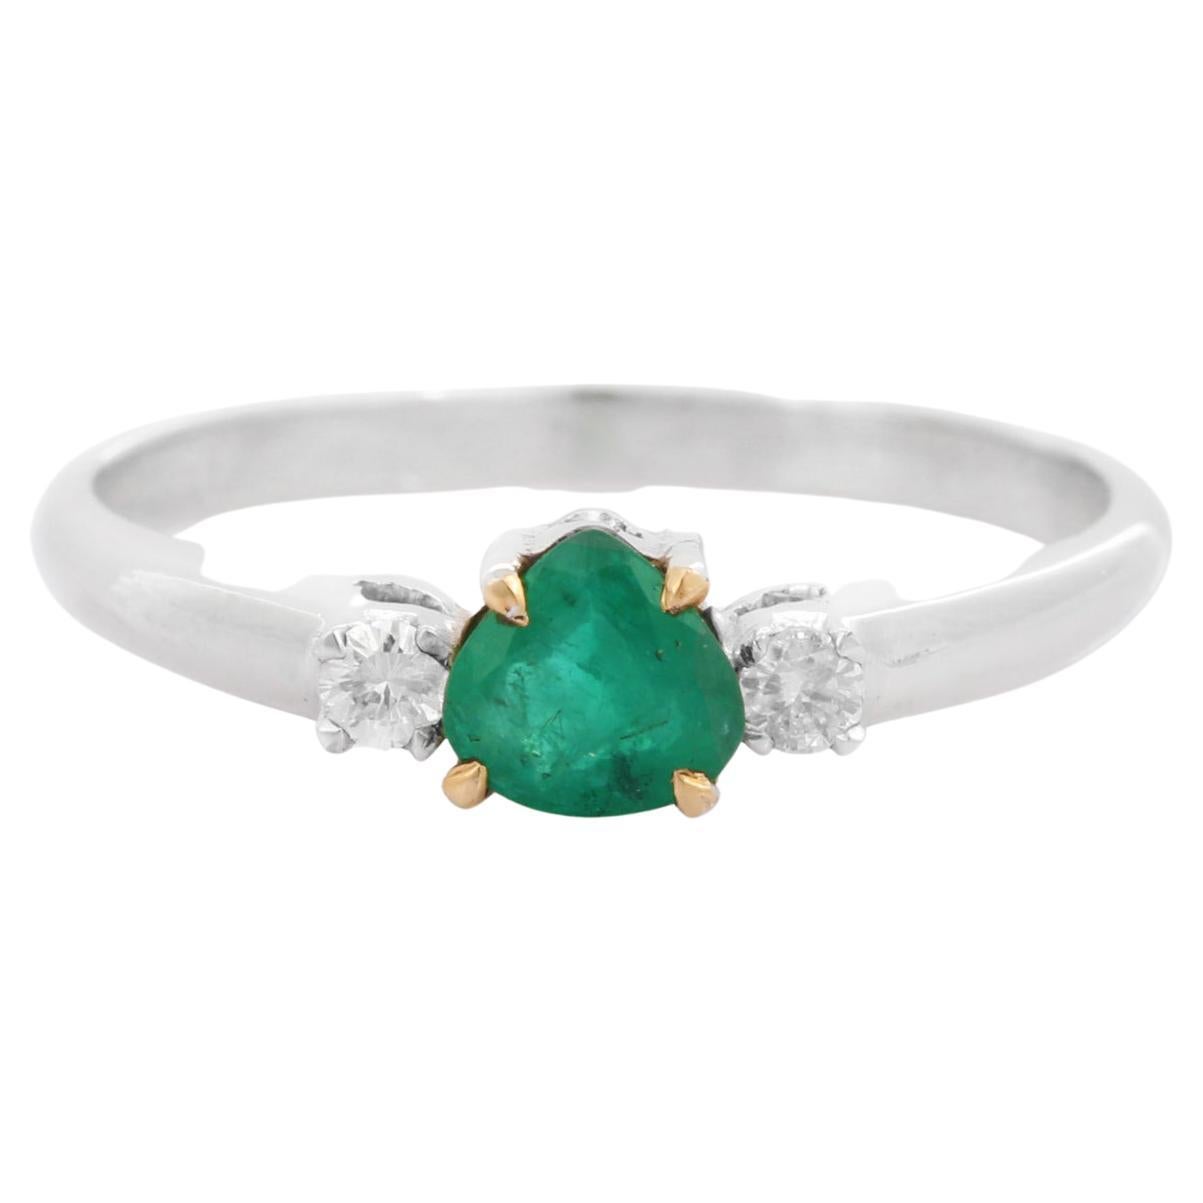 18k Solid White Gold Emerald Ring with Diamonds